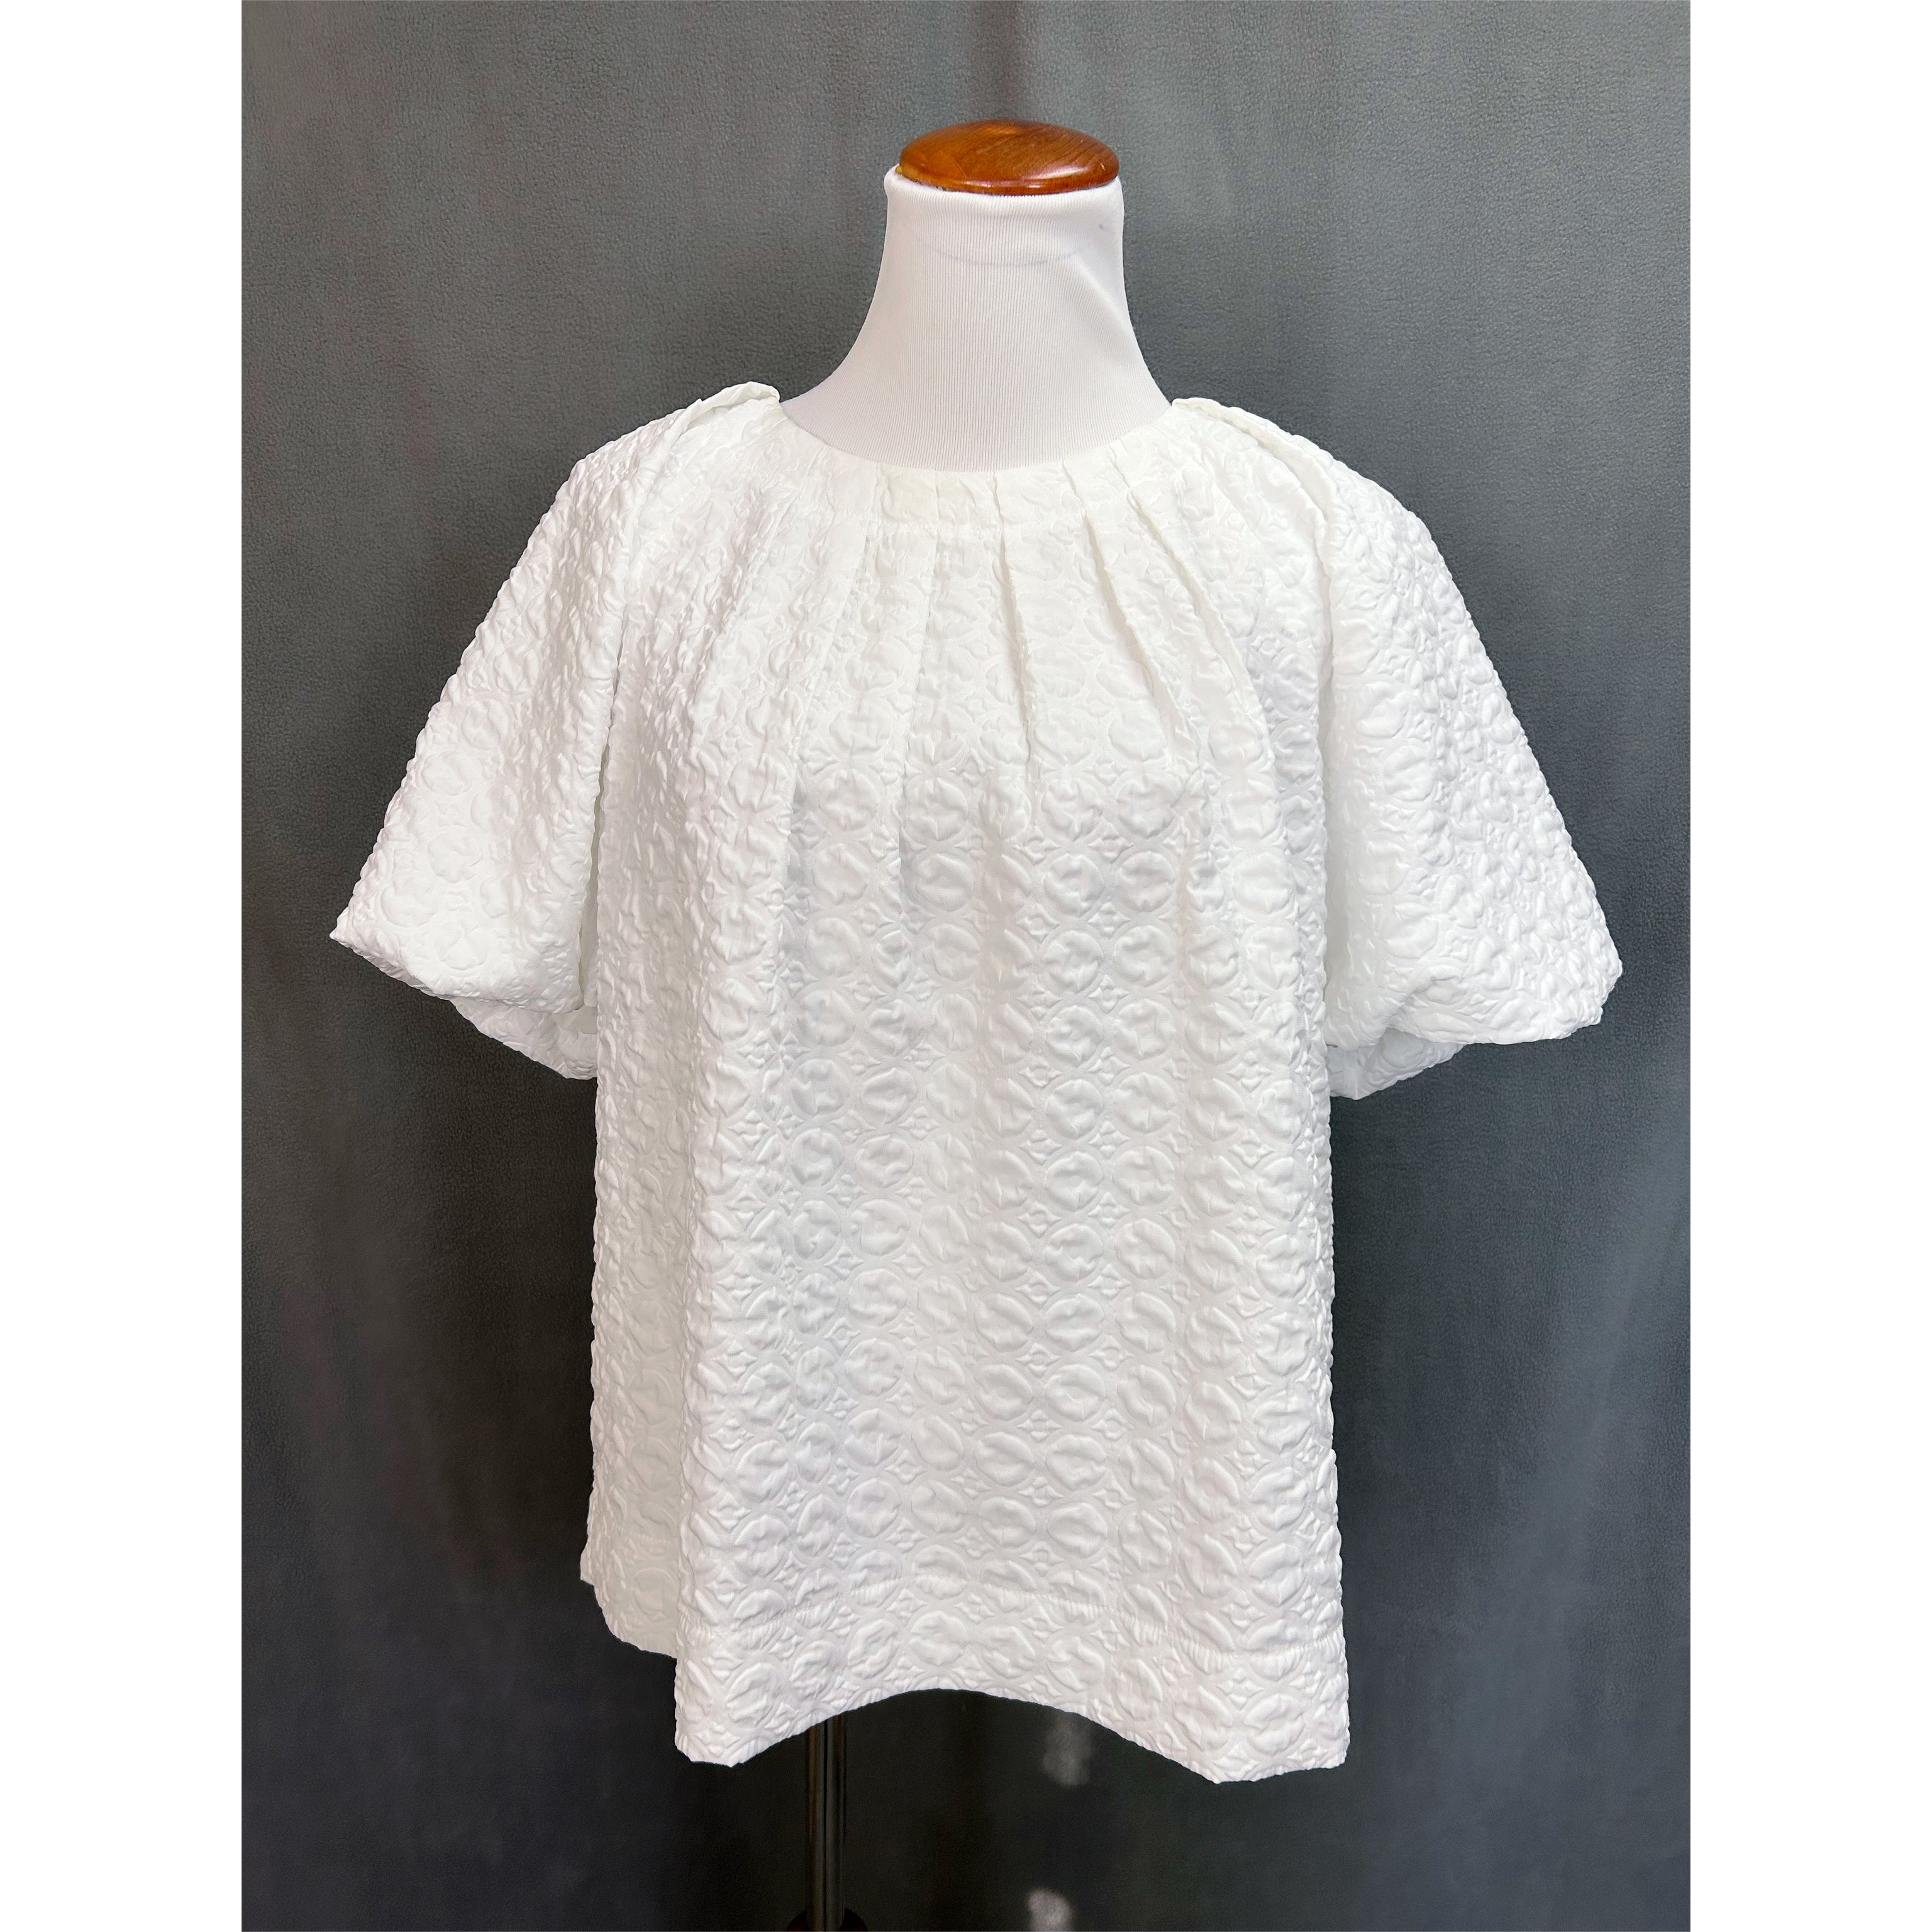 Jade white blouse, size S, NEW WITH TAGS!